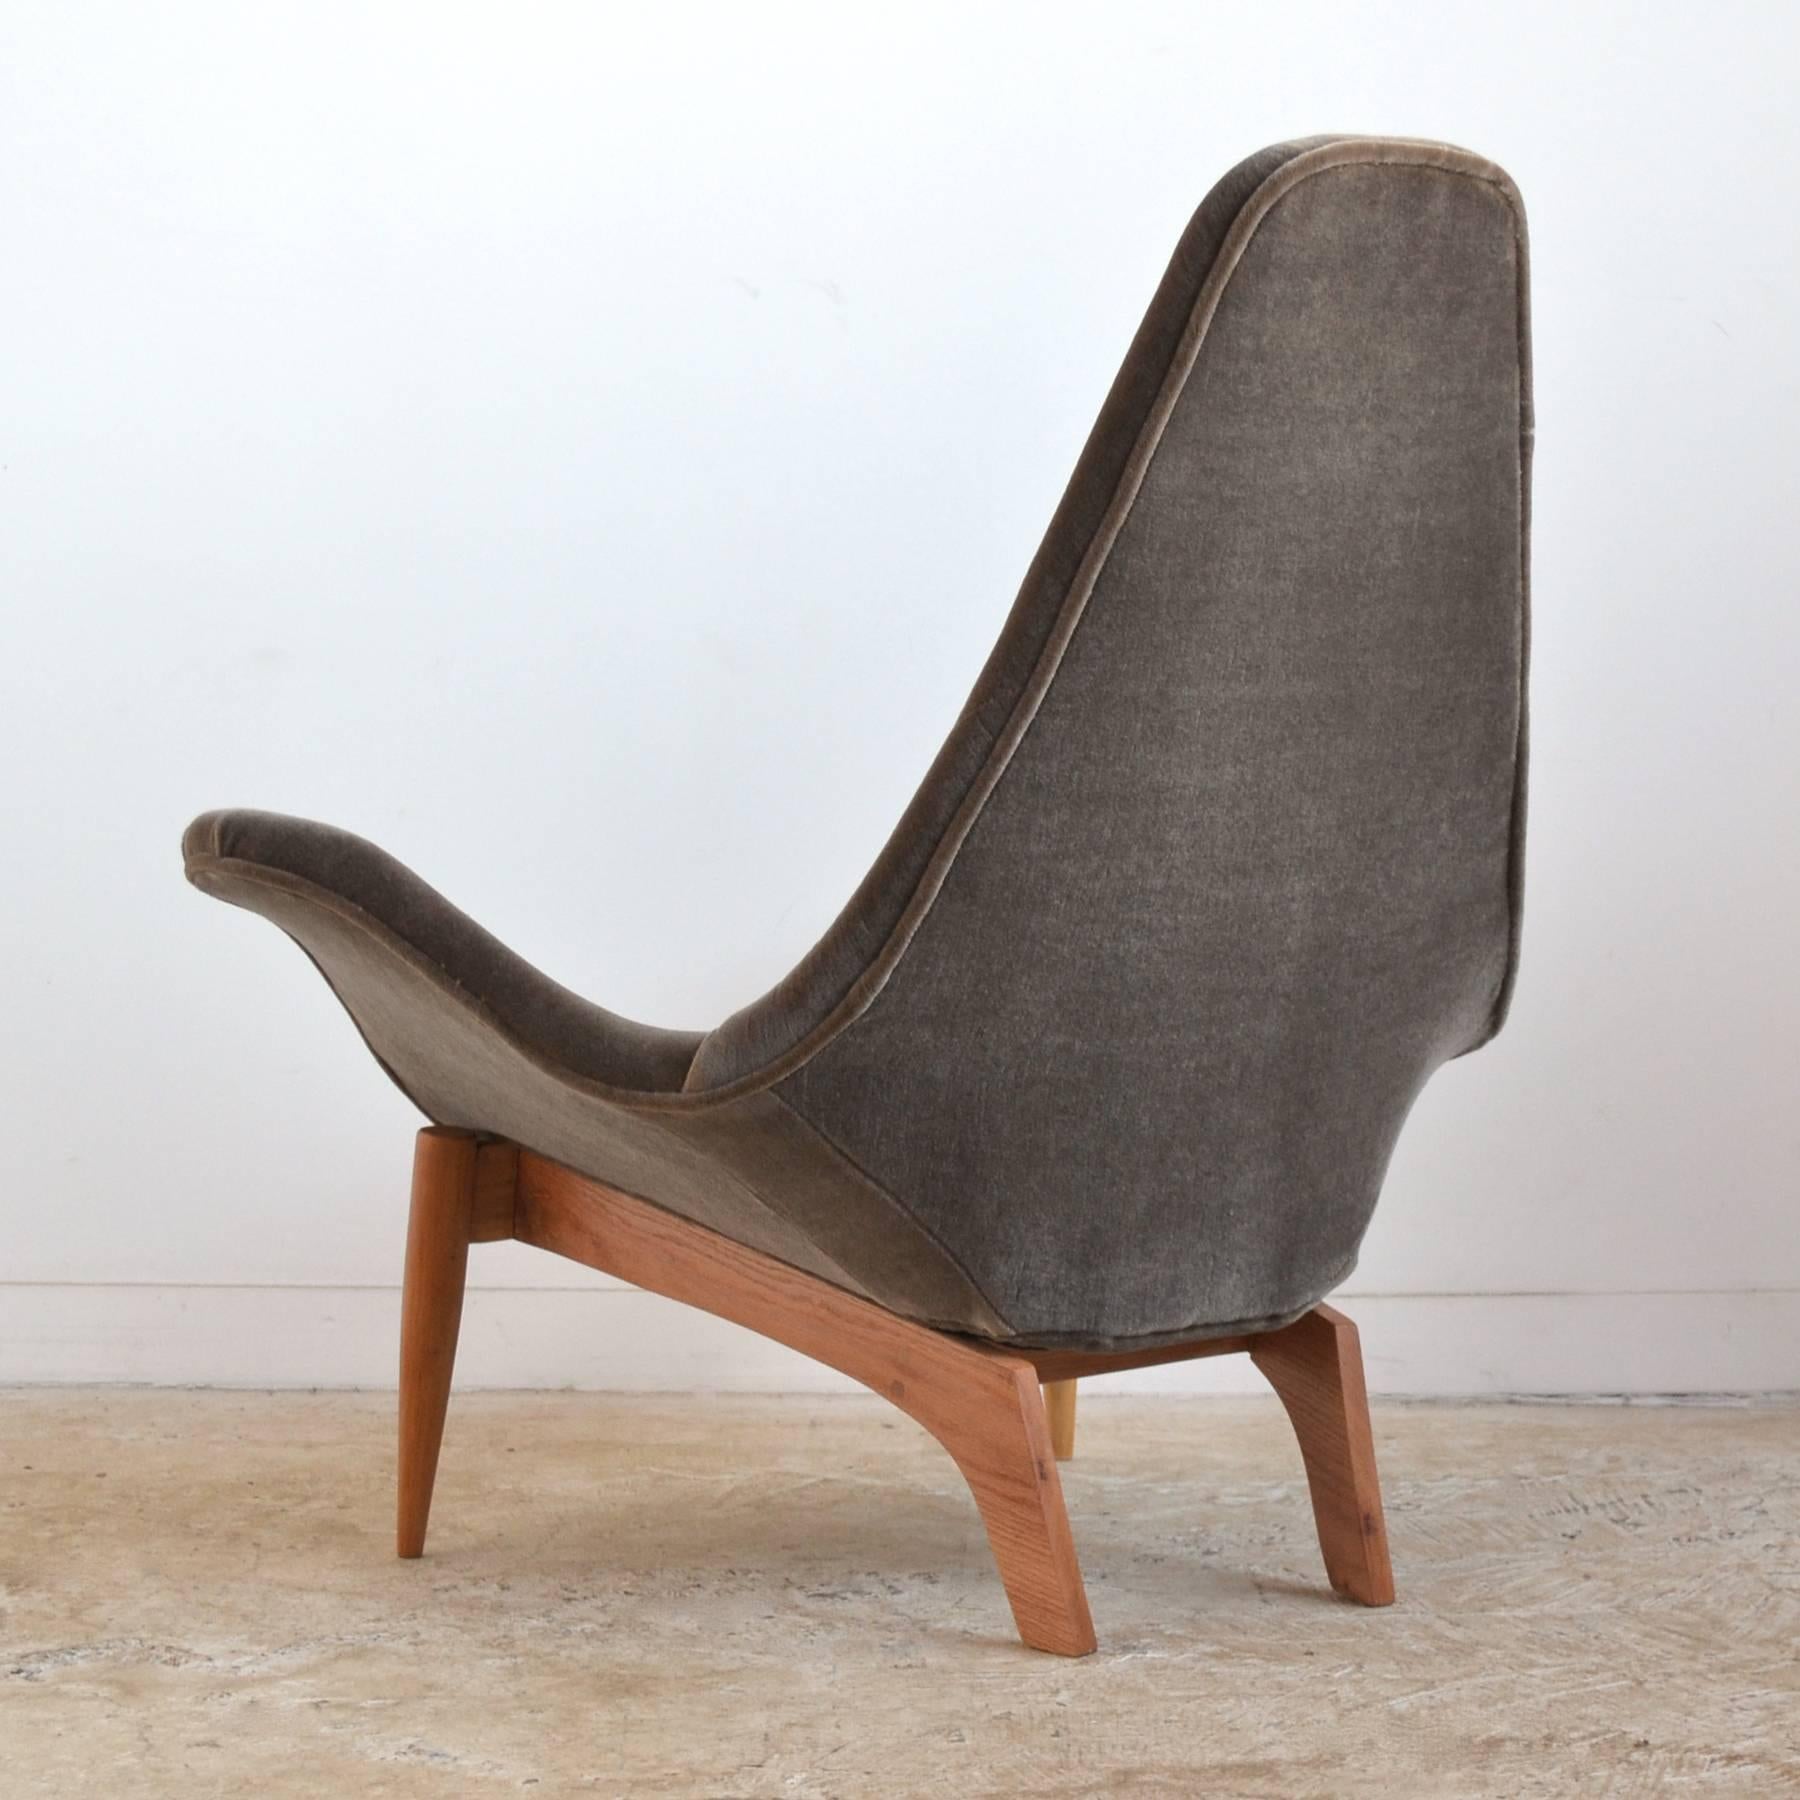 Mid-20th Century Adrian Pearsall Sculptural Lounge Chair